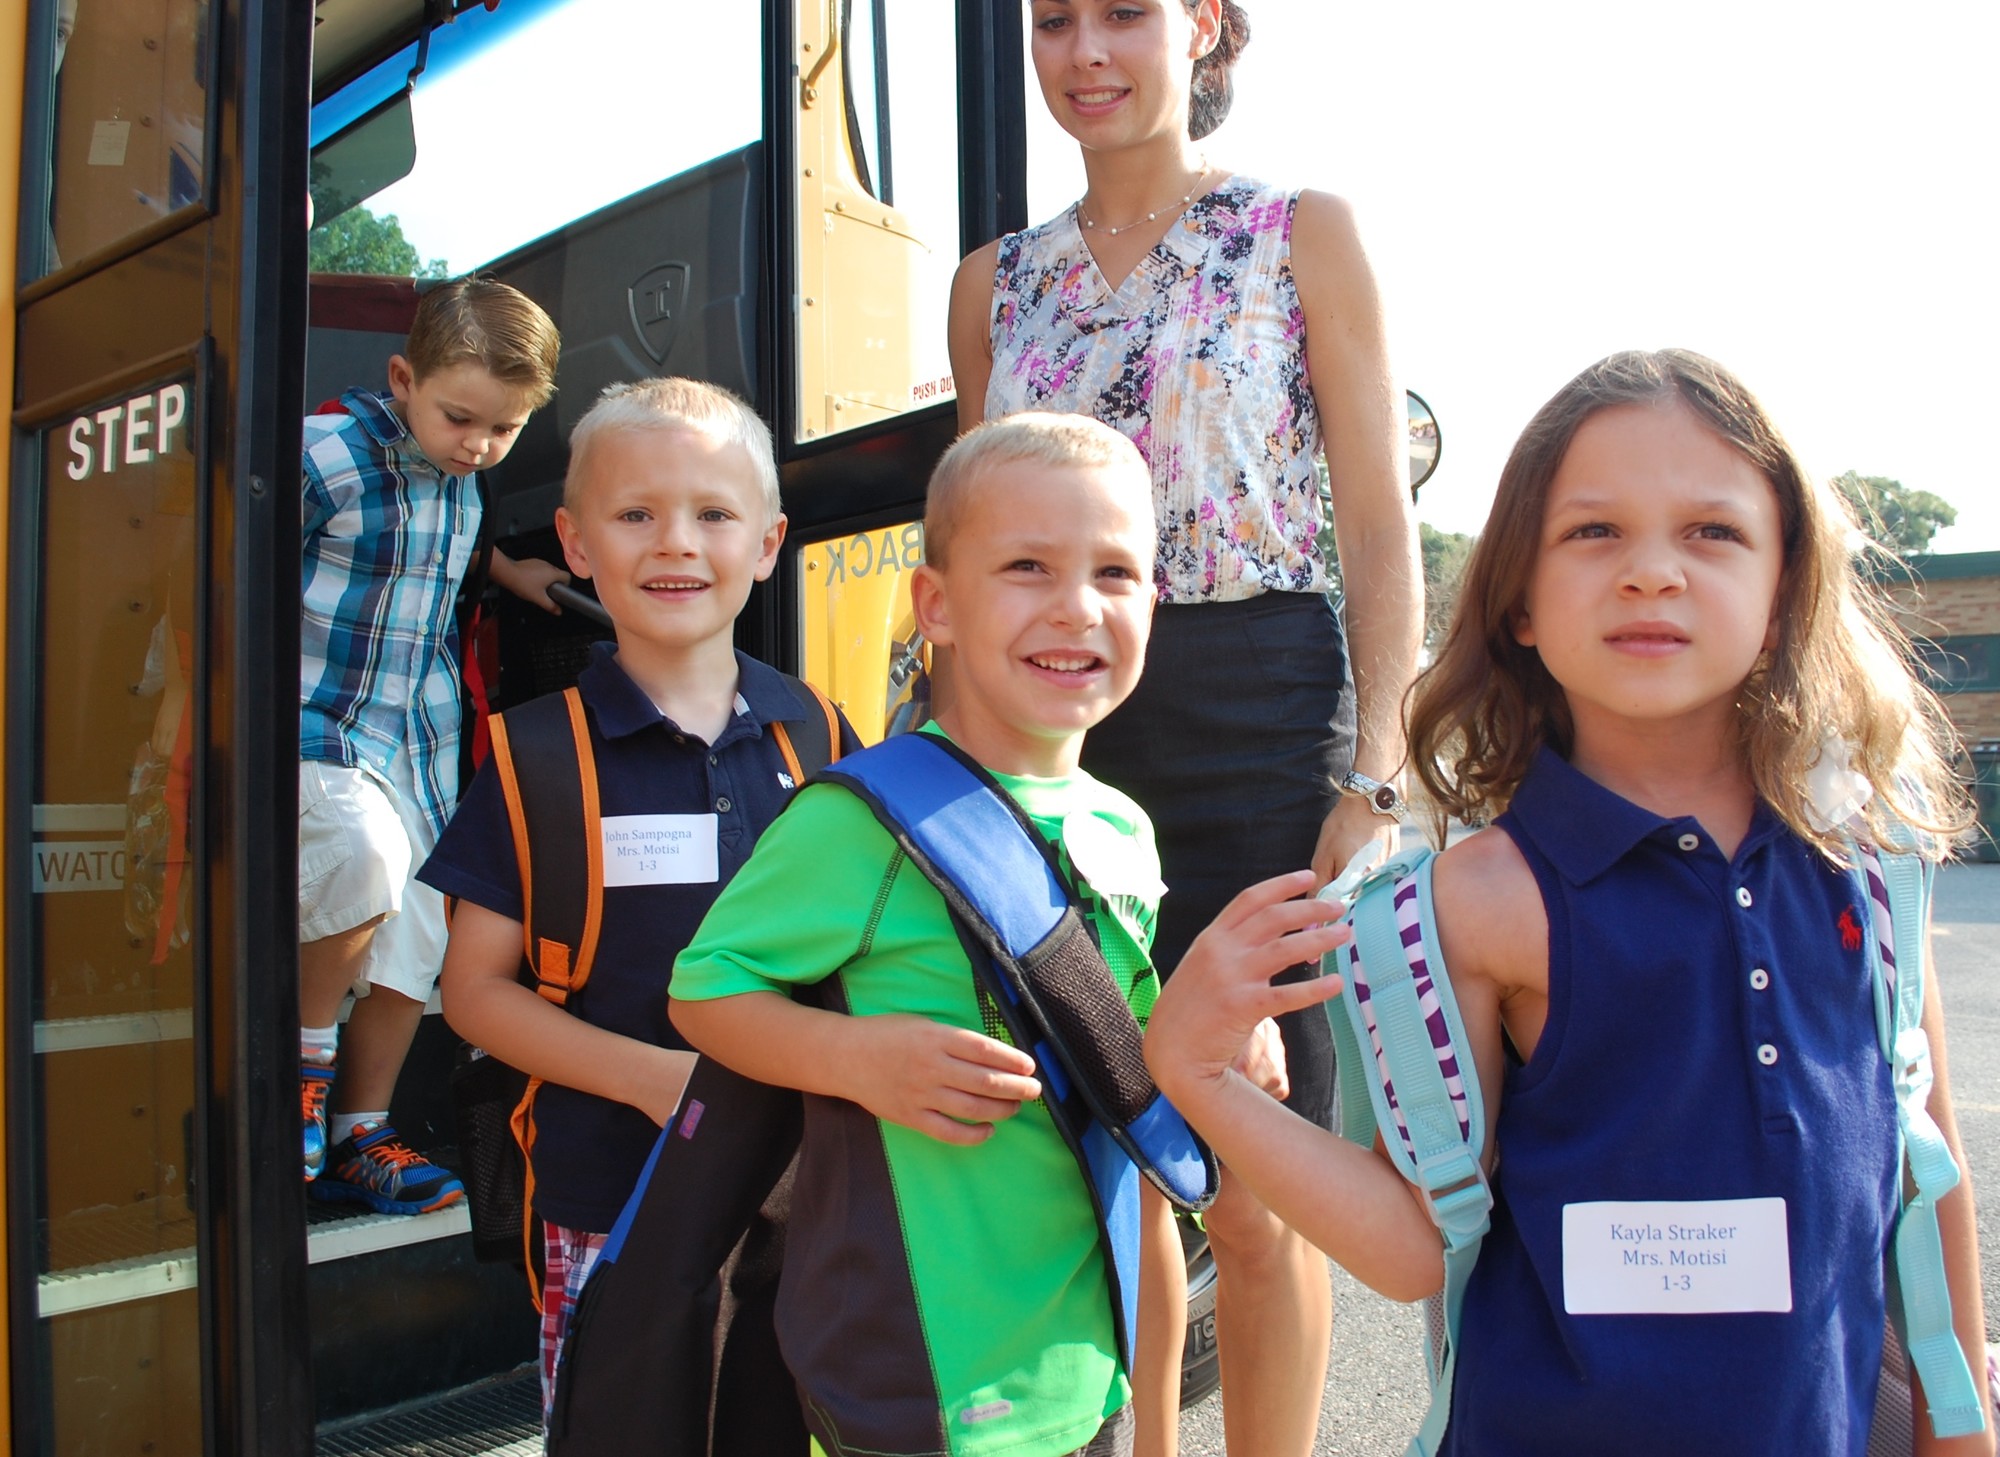 Young Seaford Manor School students, from left, Dylan Lukas, John Sampogna, Michael Calvacca and Kayla Straker arrived for their first day of school on Sept. 3 under the watchful eye of teacher Mariana Beach.